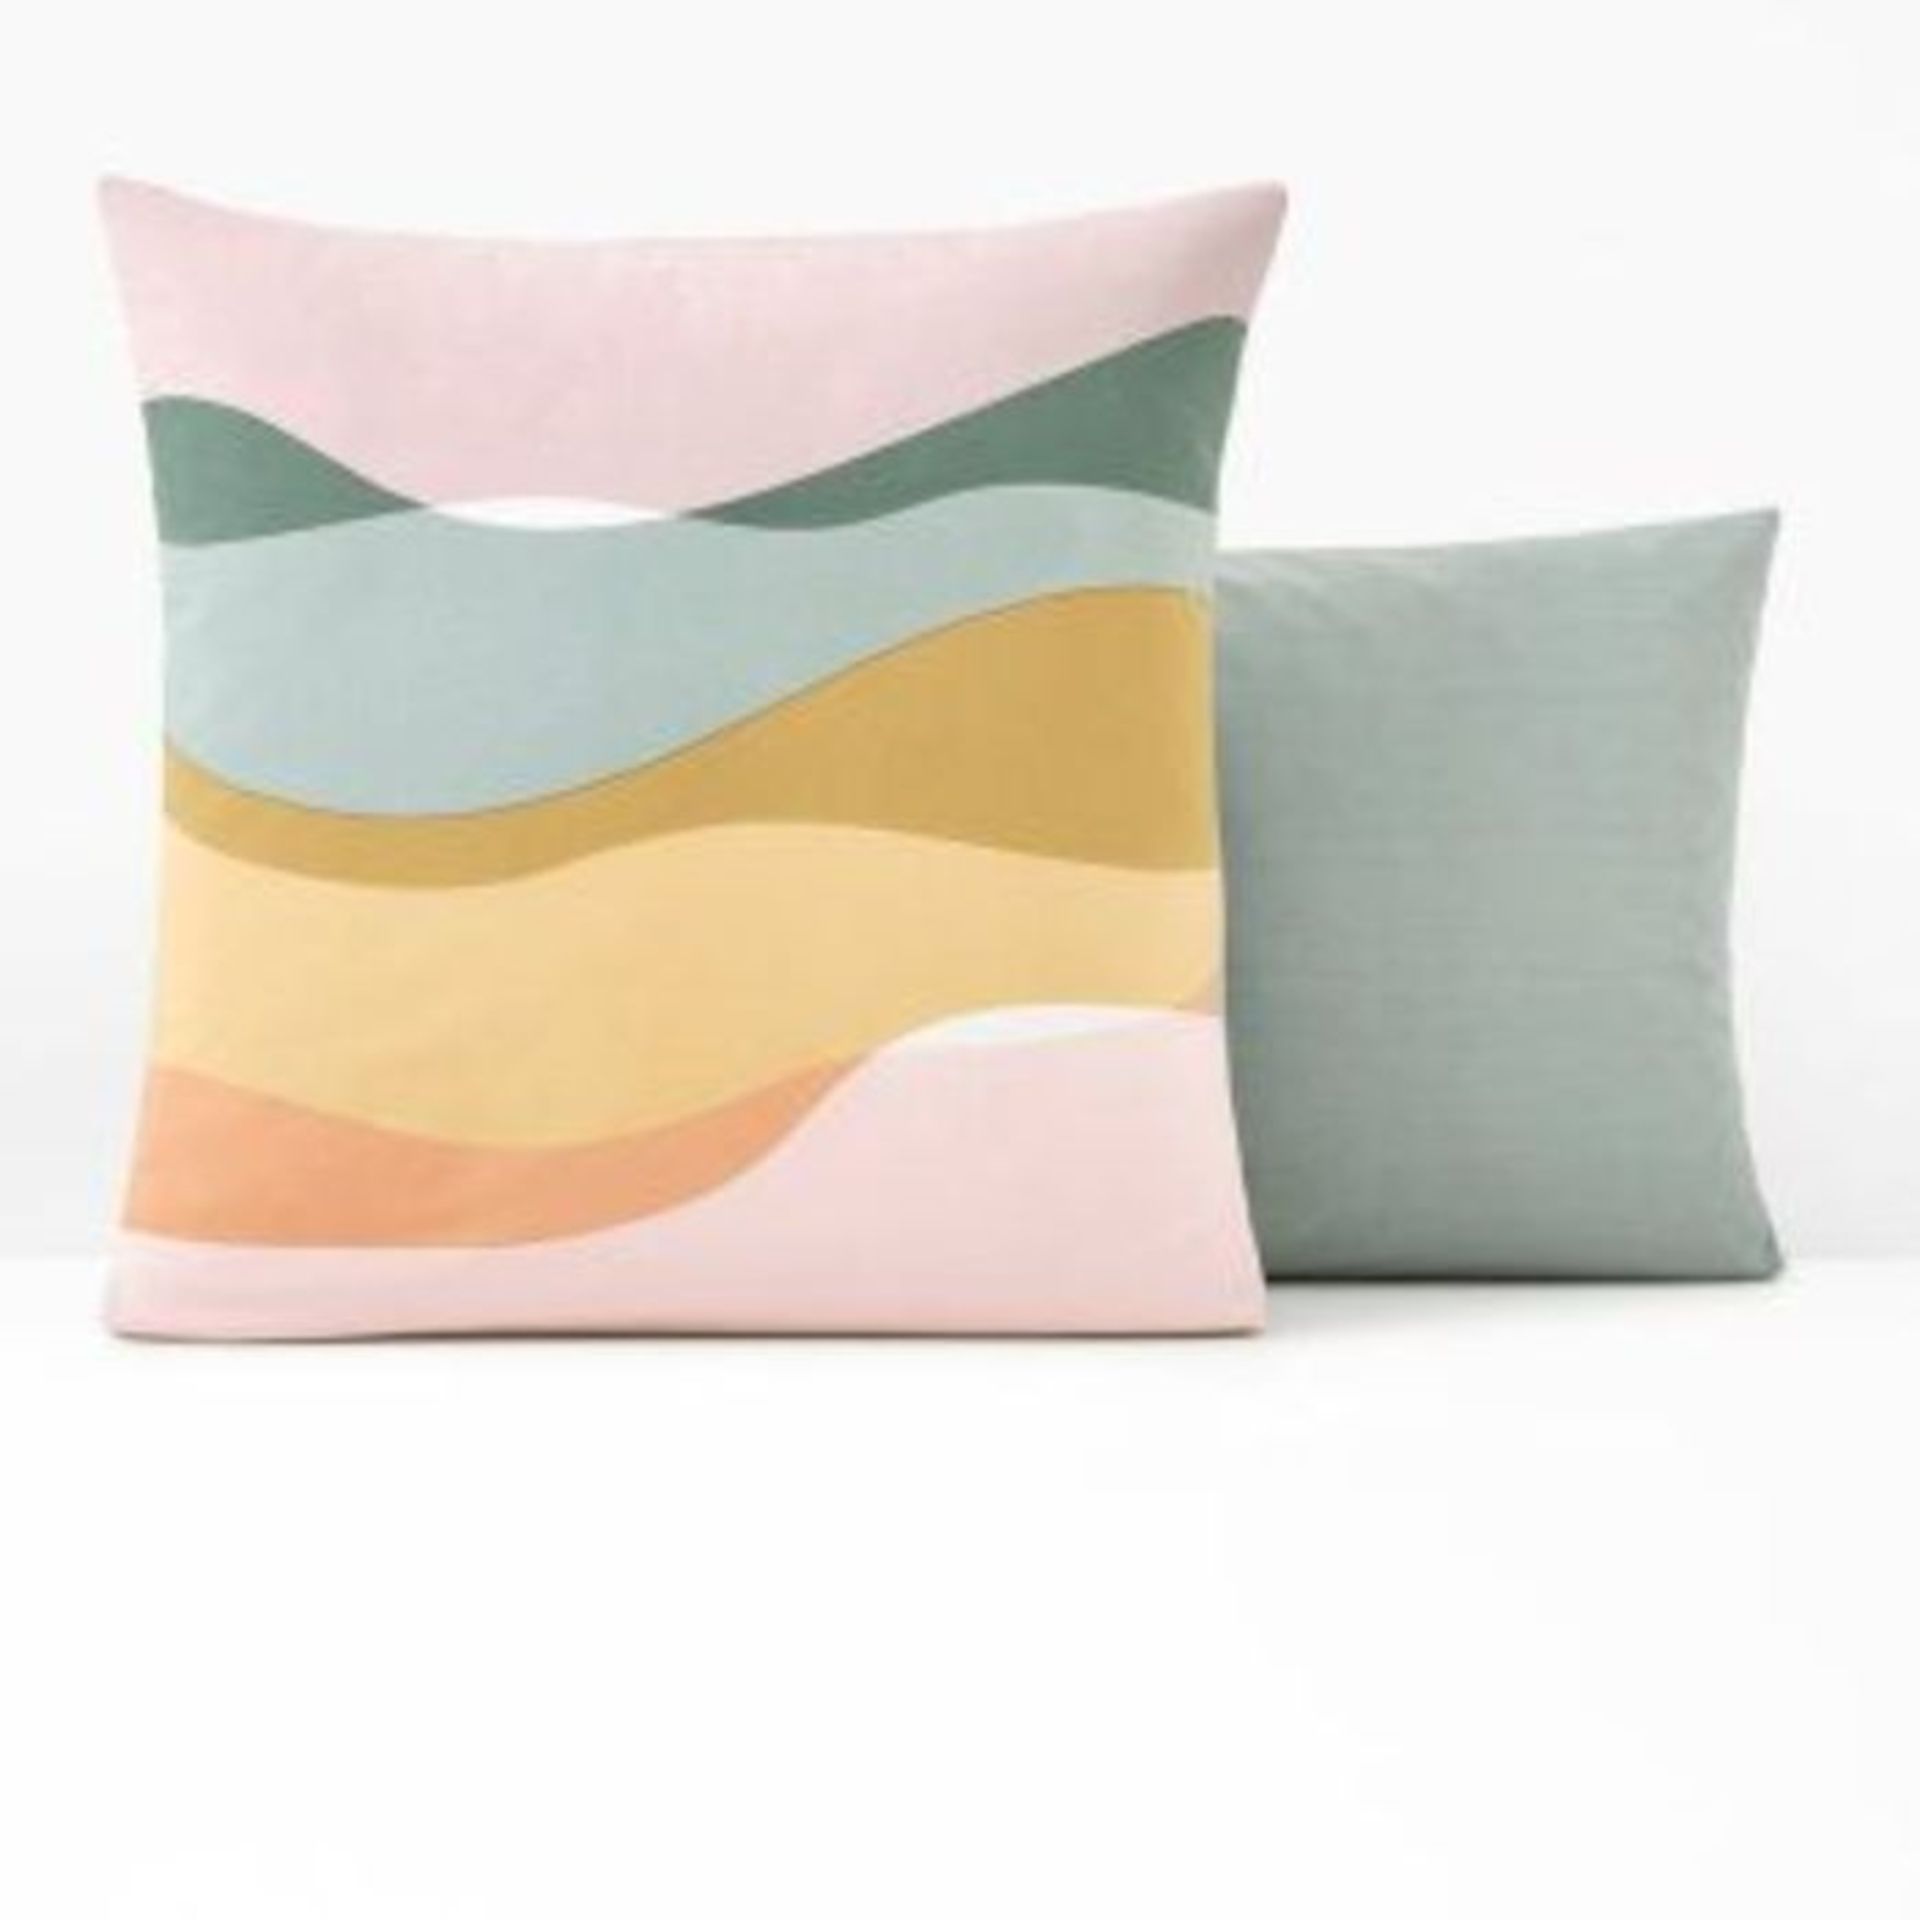 LA REDOUTE INTERIEURS ALMA PRINTED DUVET COVER - MULTICOLOURED - SIZE: KING. APPEARS AS NEW - Image 2 of 2